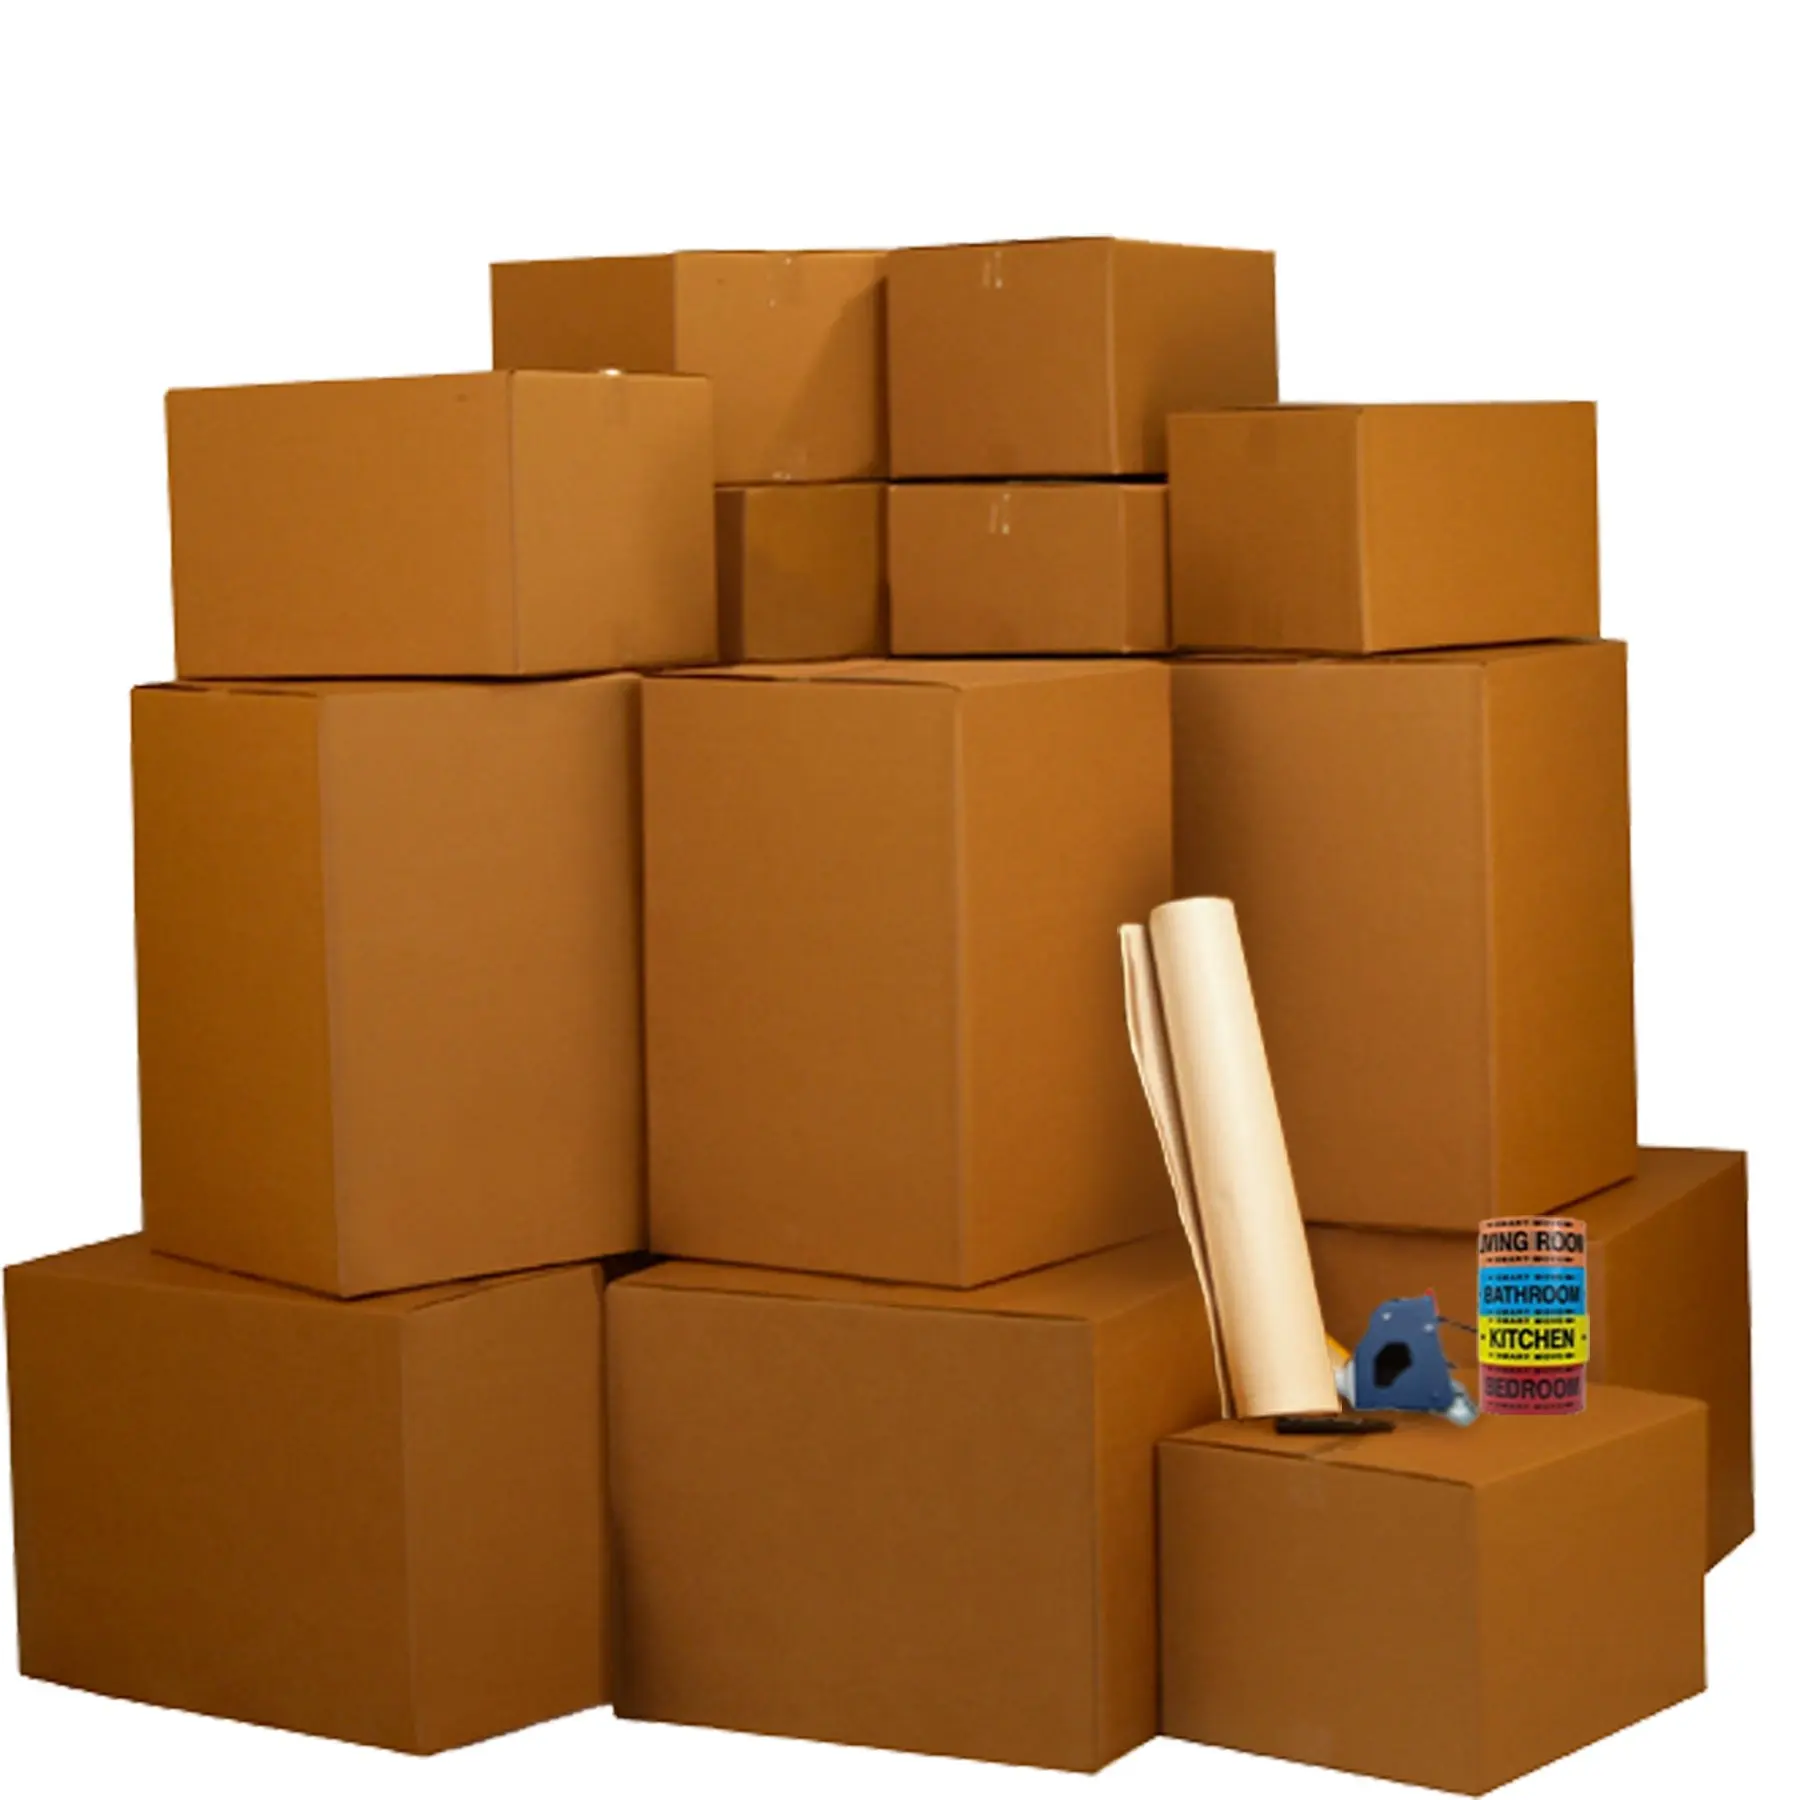 Moving Supply. Packing Supplies. 10 UBOXES 96x60x93 per Box. Move package